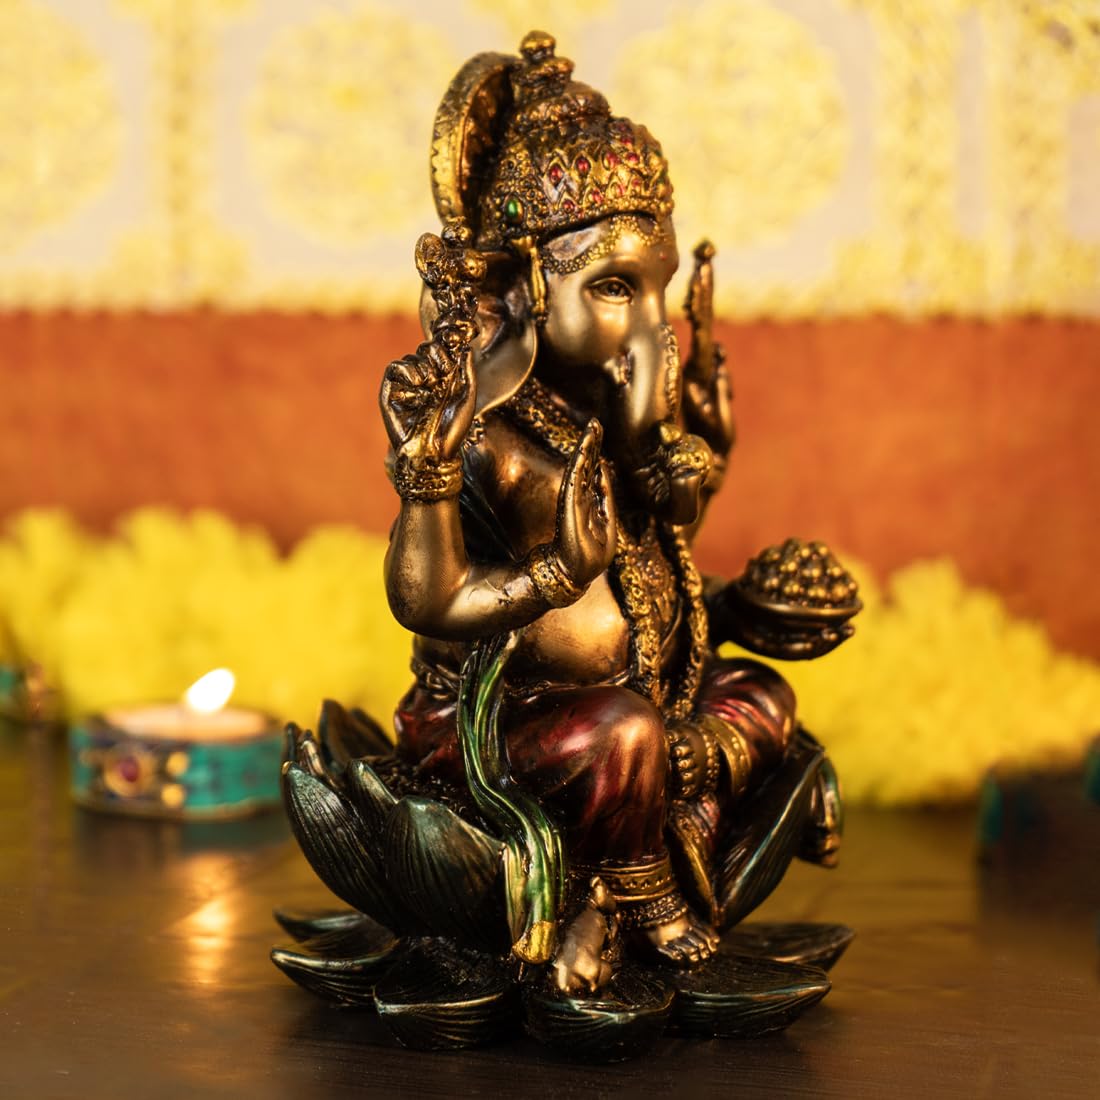 Buy perpetual Handcrafted Polyresin Eco Friendly Book Reading Lord Ganesha  Ganpati Idol for Home Decor Diwali Decoration Showpiece for Home, Office,  Table, Dashbord,Desktop and Gift Item. Online at Low Prices in India -